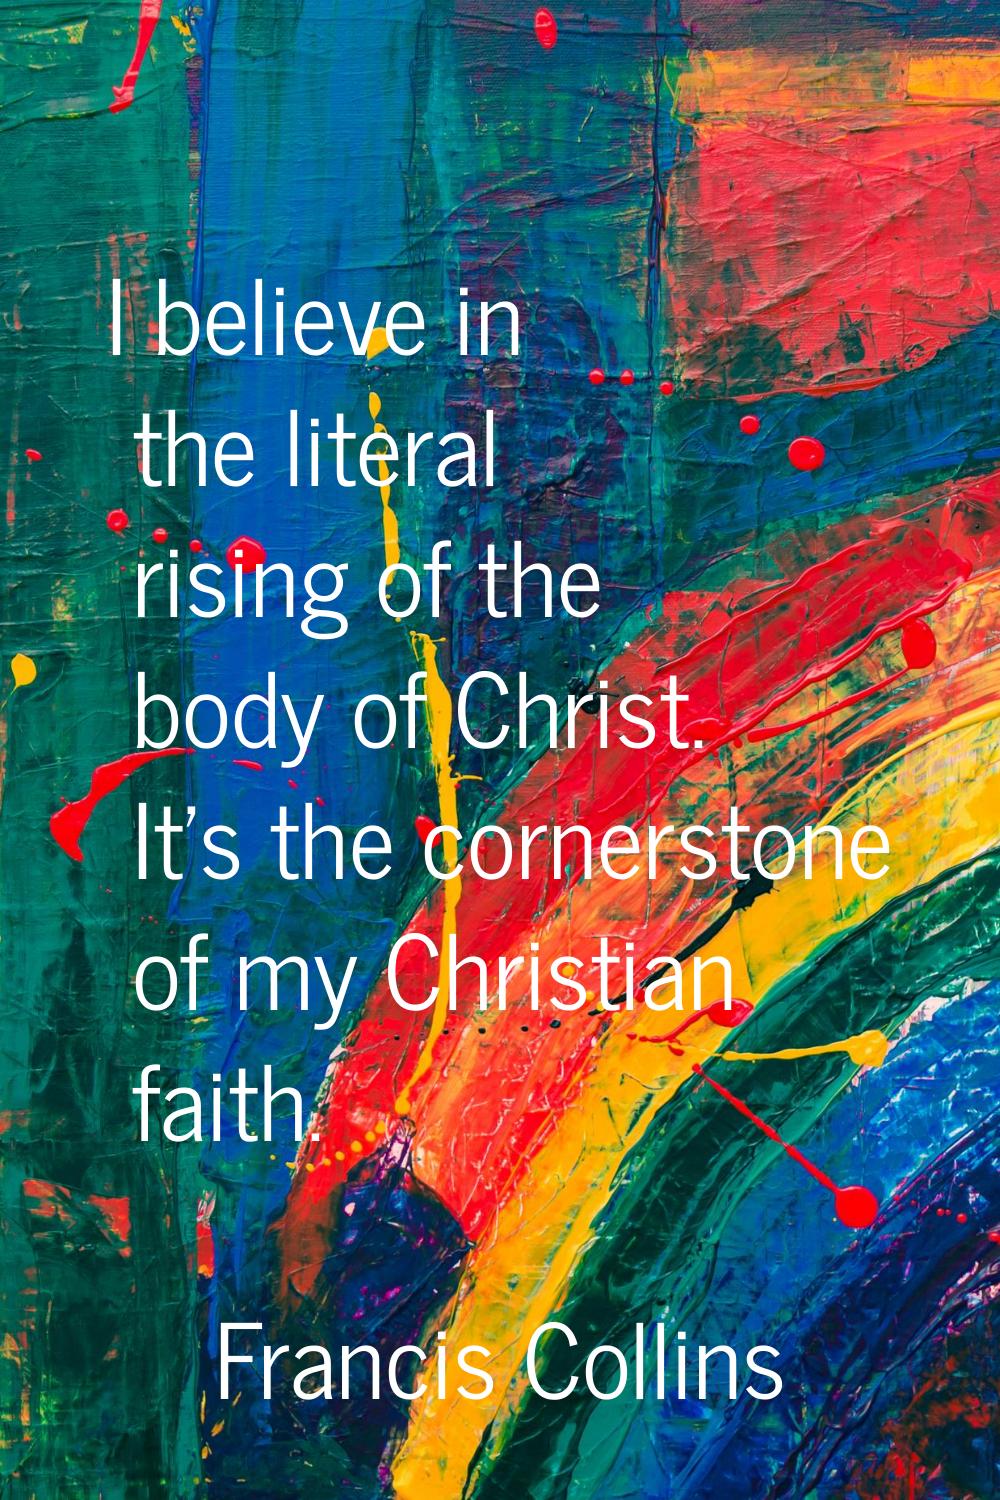 I believe in the literal rising of the body of Christ. It's the cornerstone of my Christian faith.